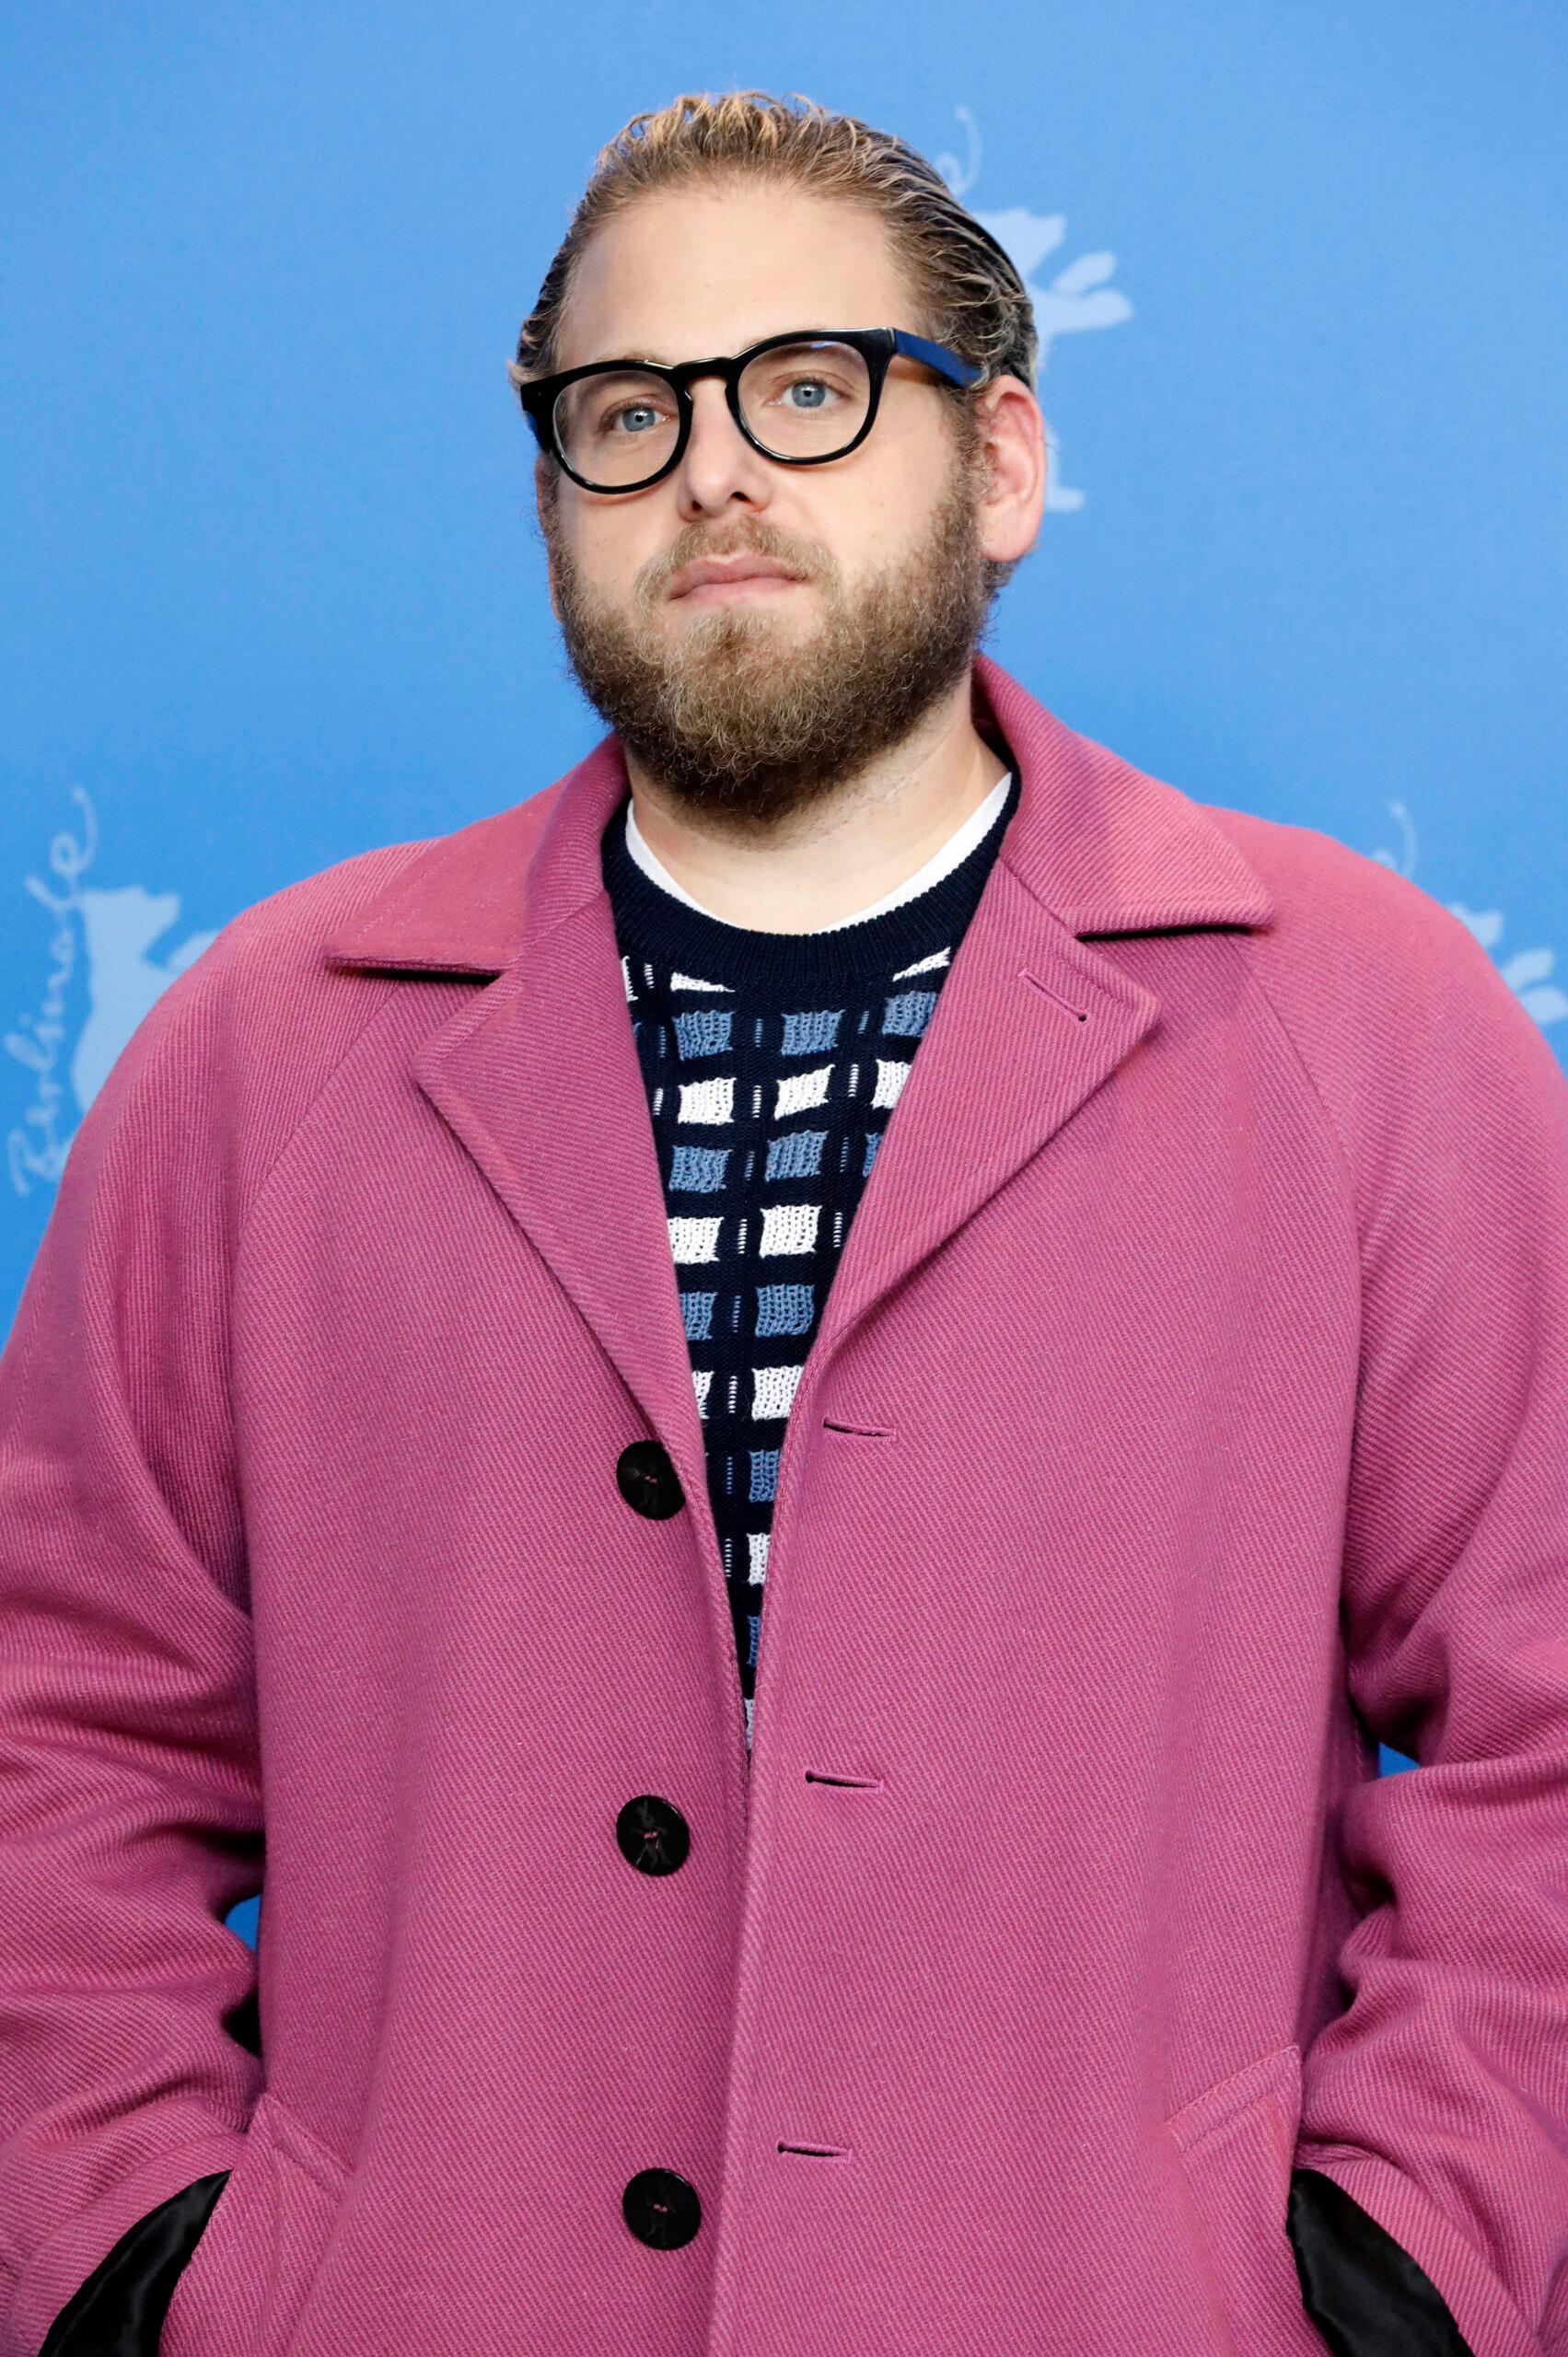 Jonah Hill at Photocall 'Mid90s', Berlinale 2019